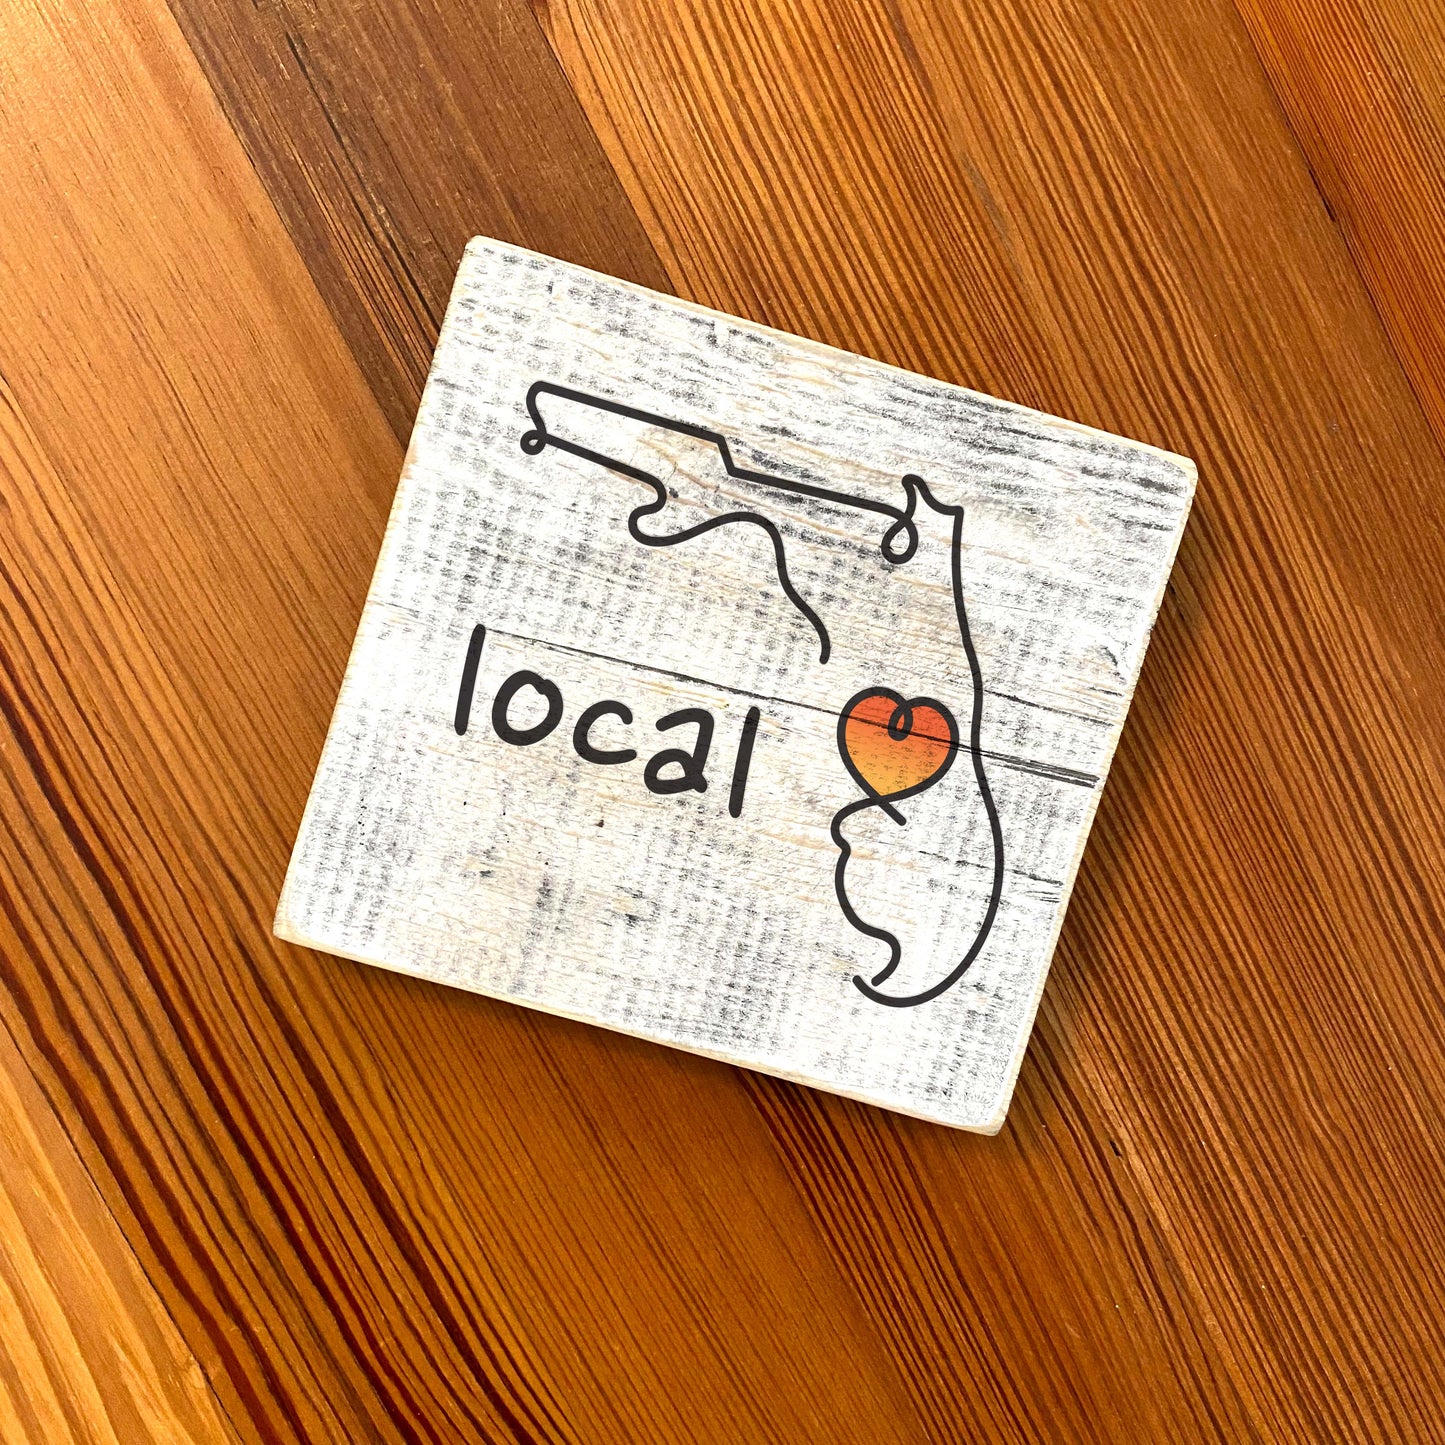 Florida Local - Handcrafted Artisan Wood Sign 5.5" x 5.5"